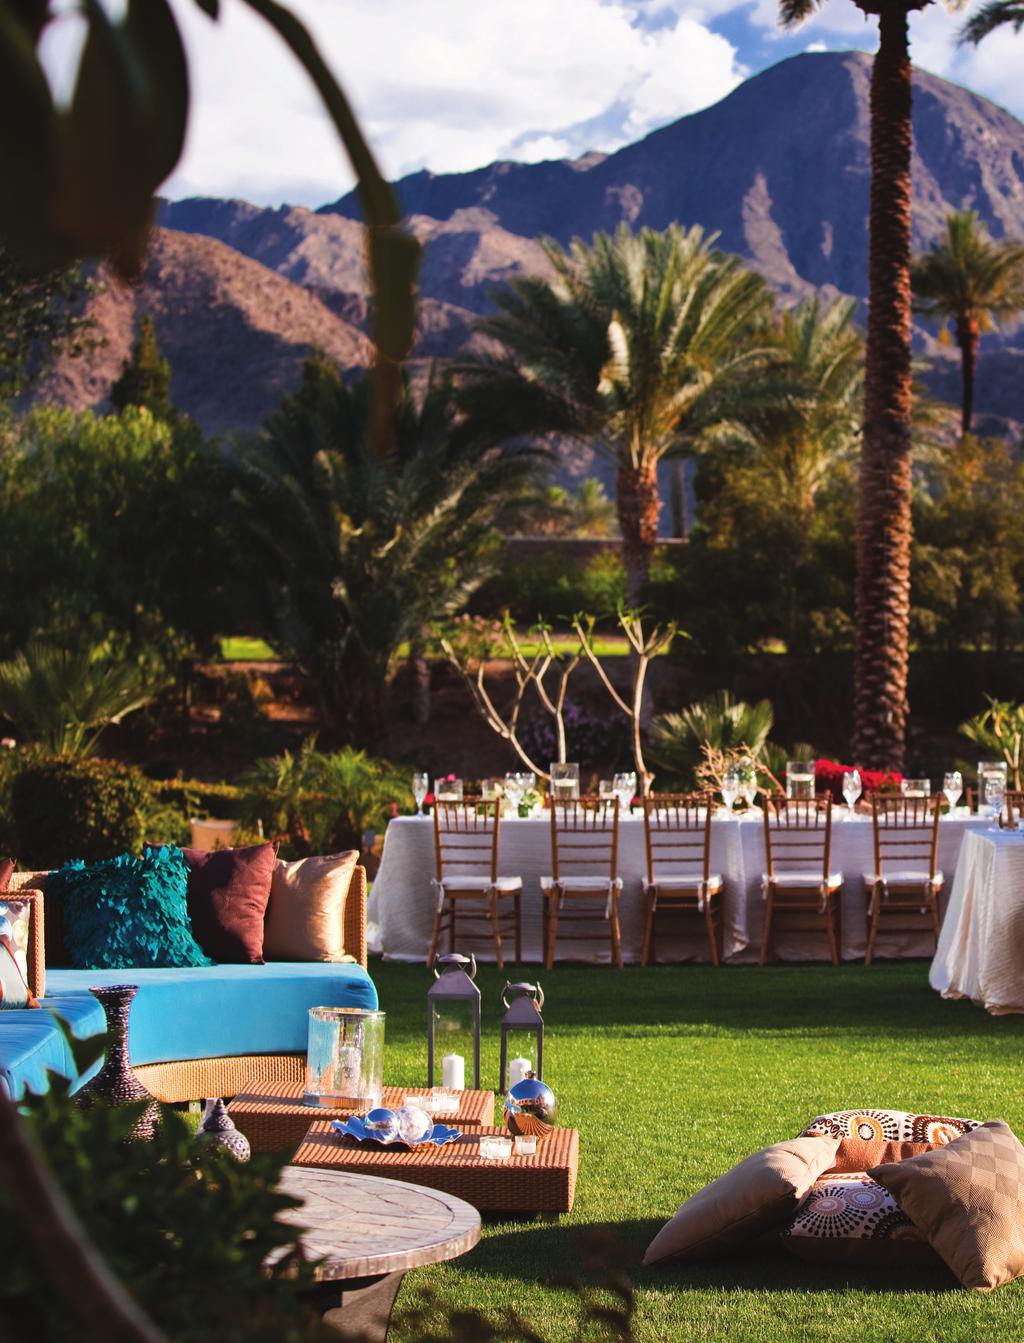 we are here At the base of the dramatic Santa Rosa Mountains in the exclusive desert community of Indian Wells.